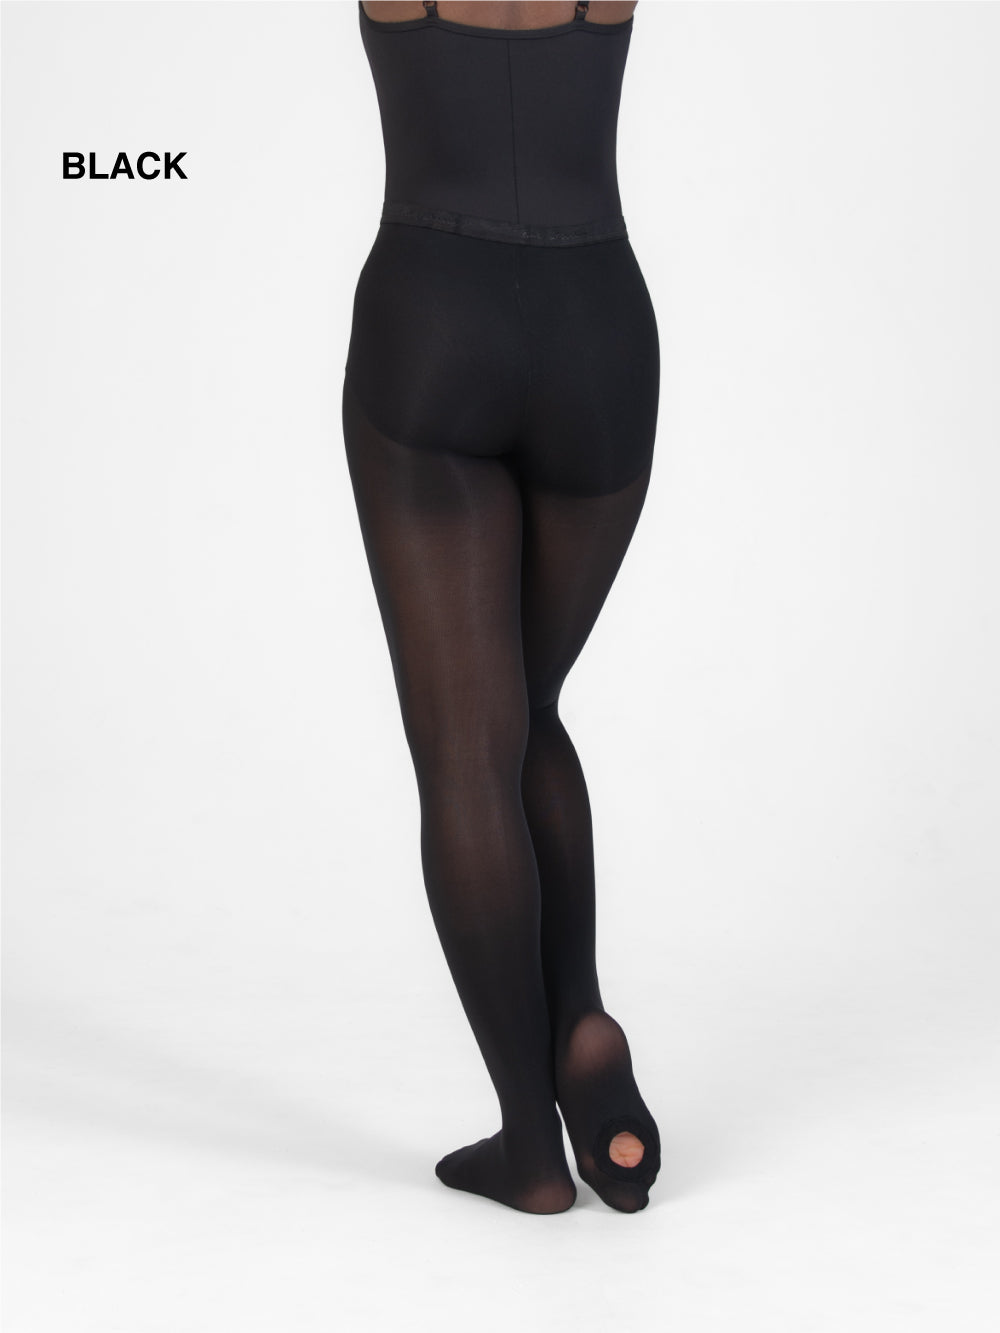 TotalSTRETCH Seamless Low Rise Convertible Tights - WOMENS – Body